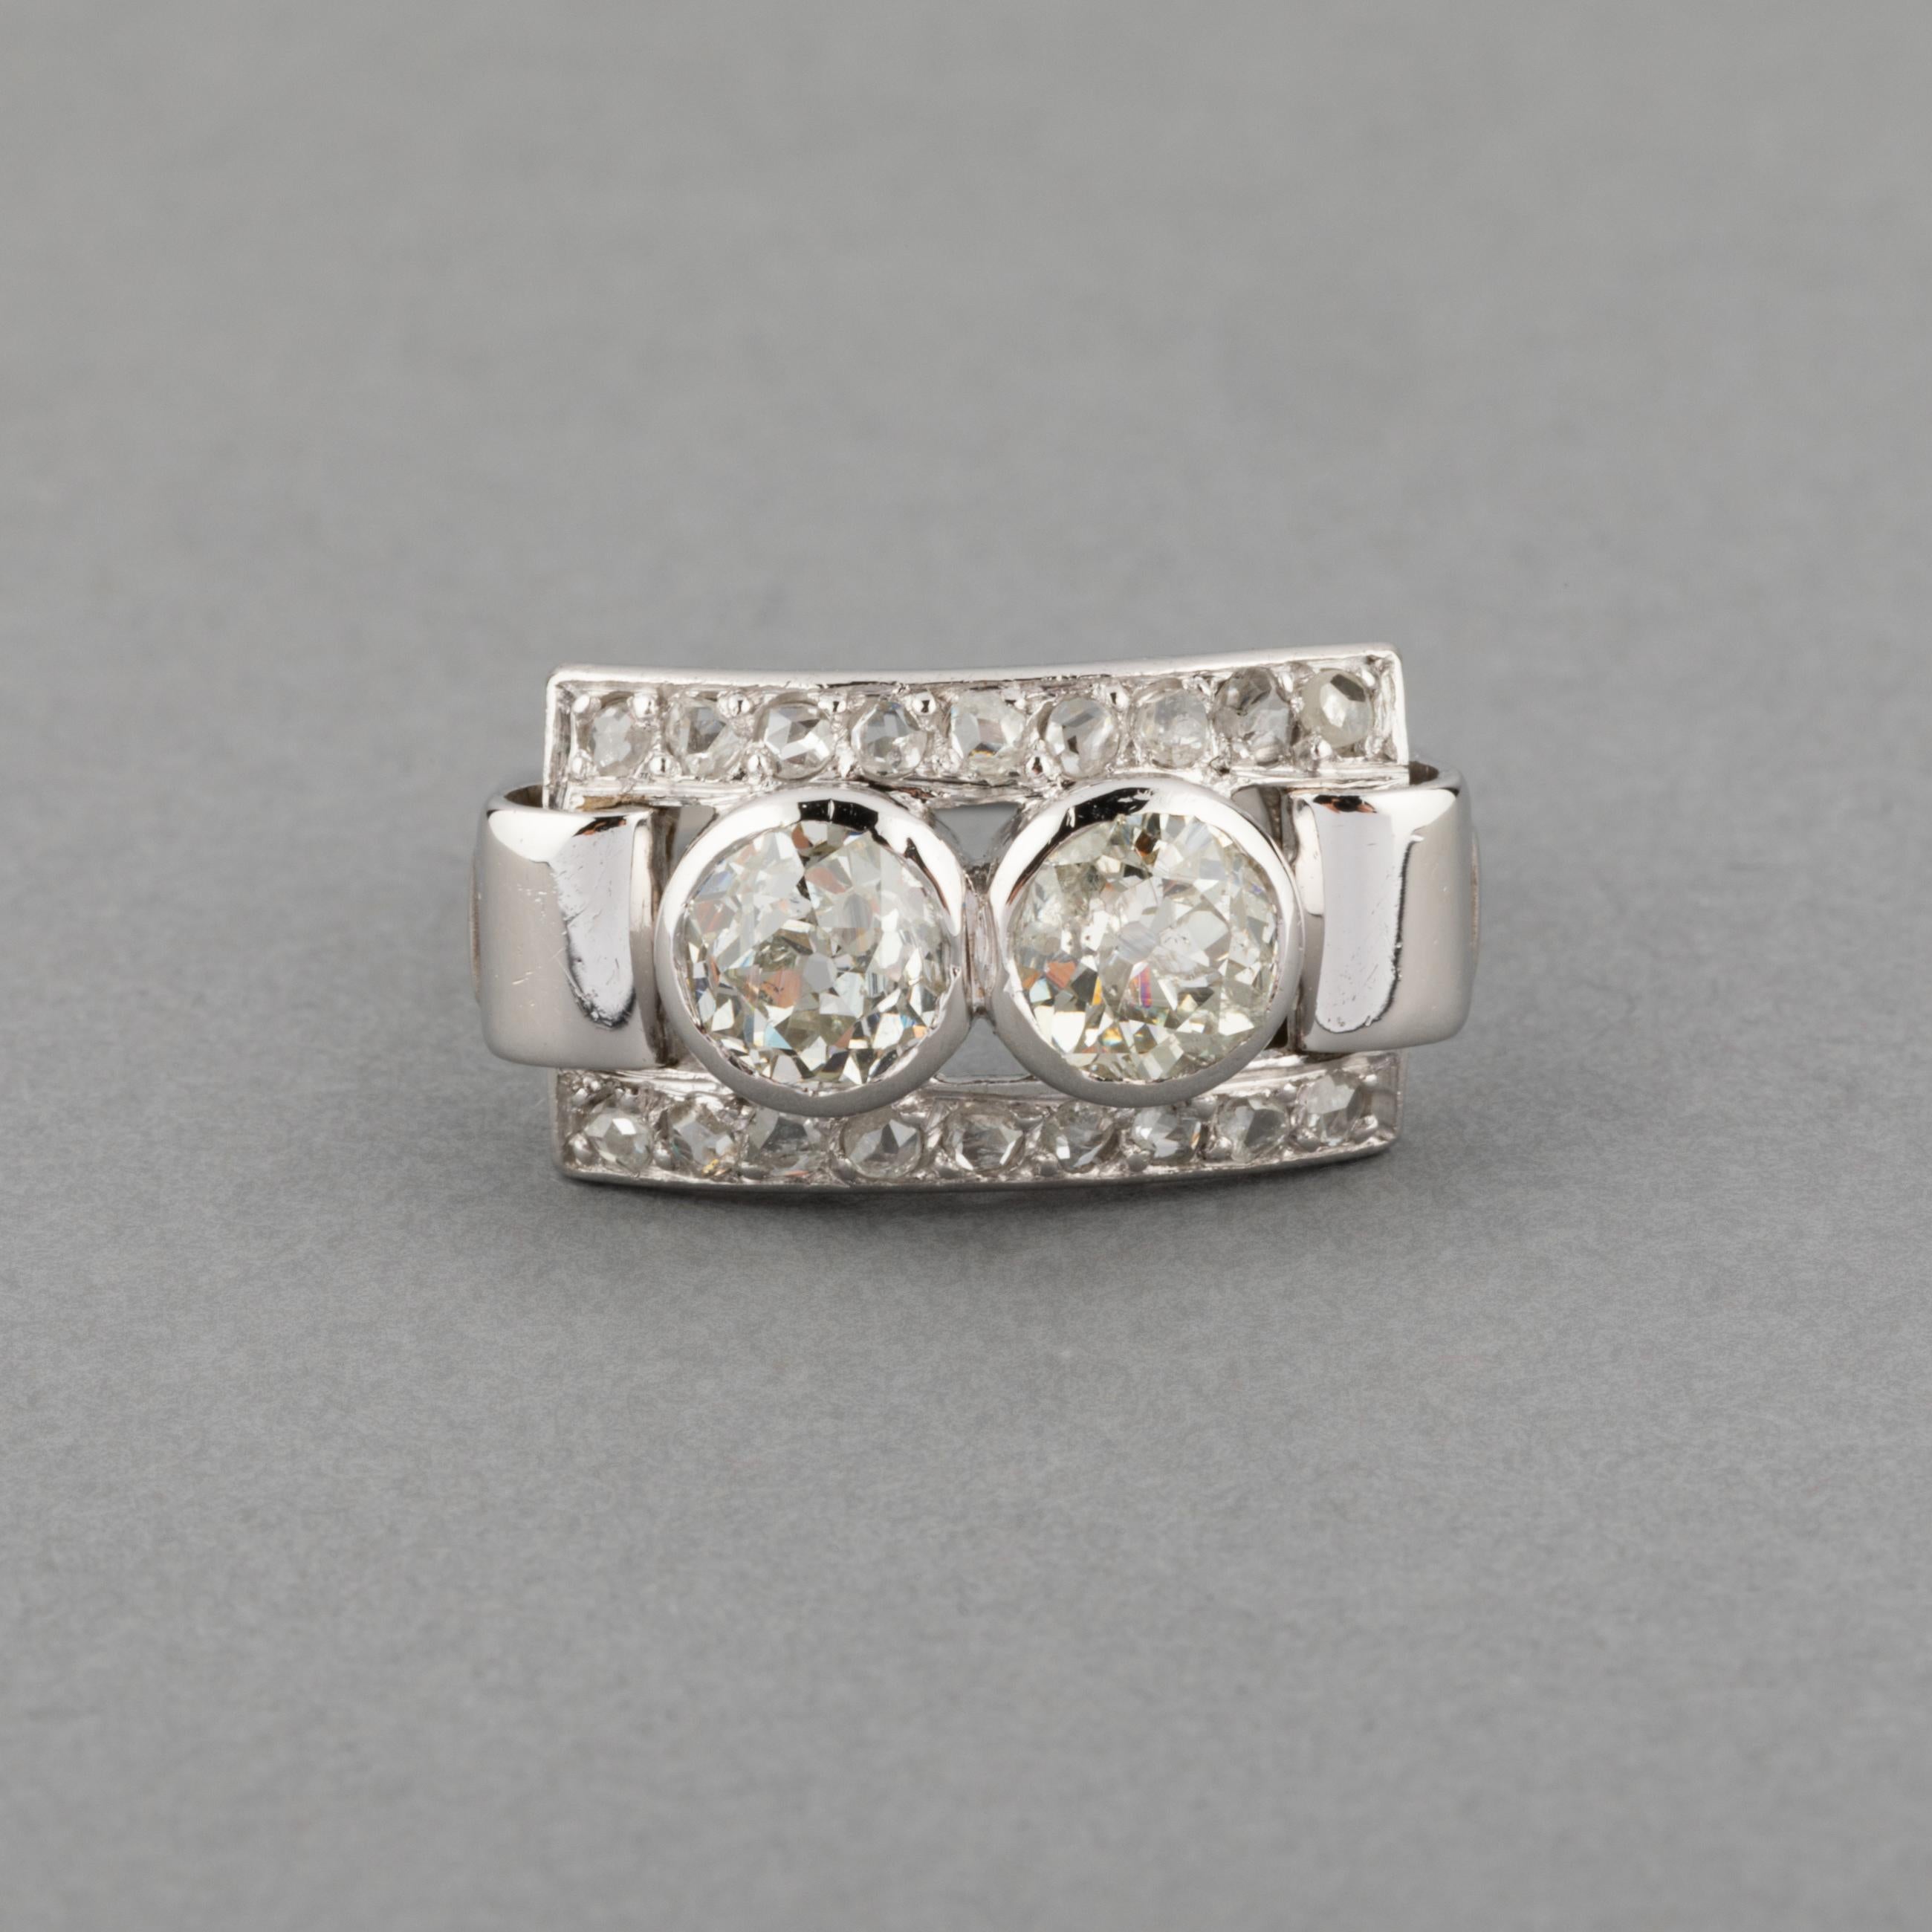 A very lovely French Art Deco ring, made in France circa 1930.

Made in white gold and platinum, set with two old European cut diamonds of 0.50 carats each. The diamonds color is I/J and clarity SI1/SI2.

Ring size: 53 or 6.20 USA.

Weight: 4.60